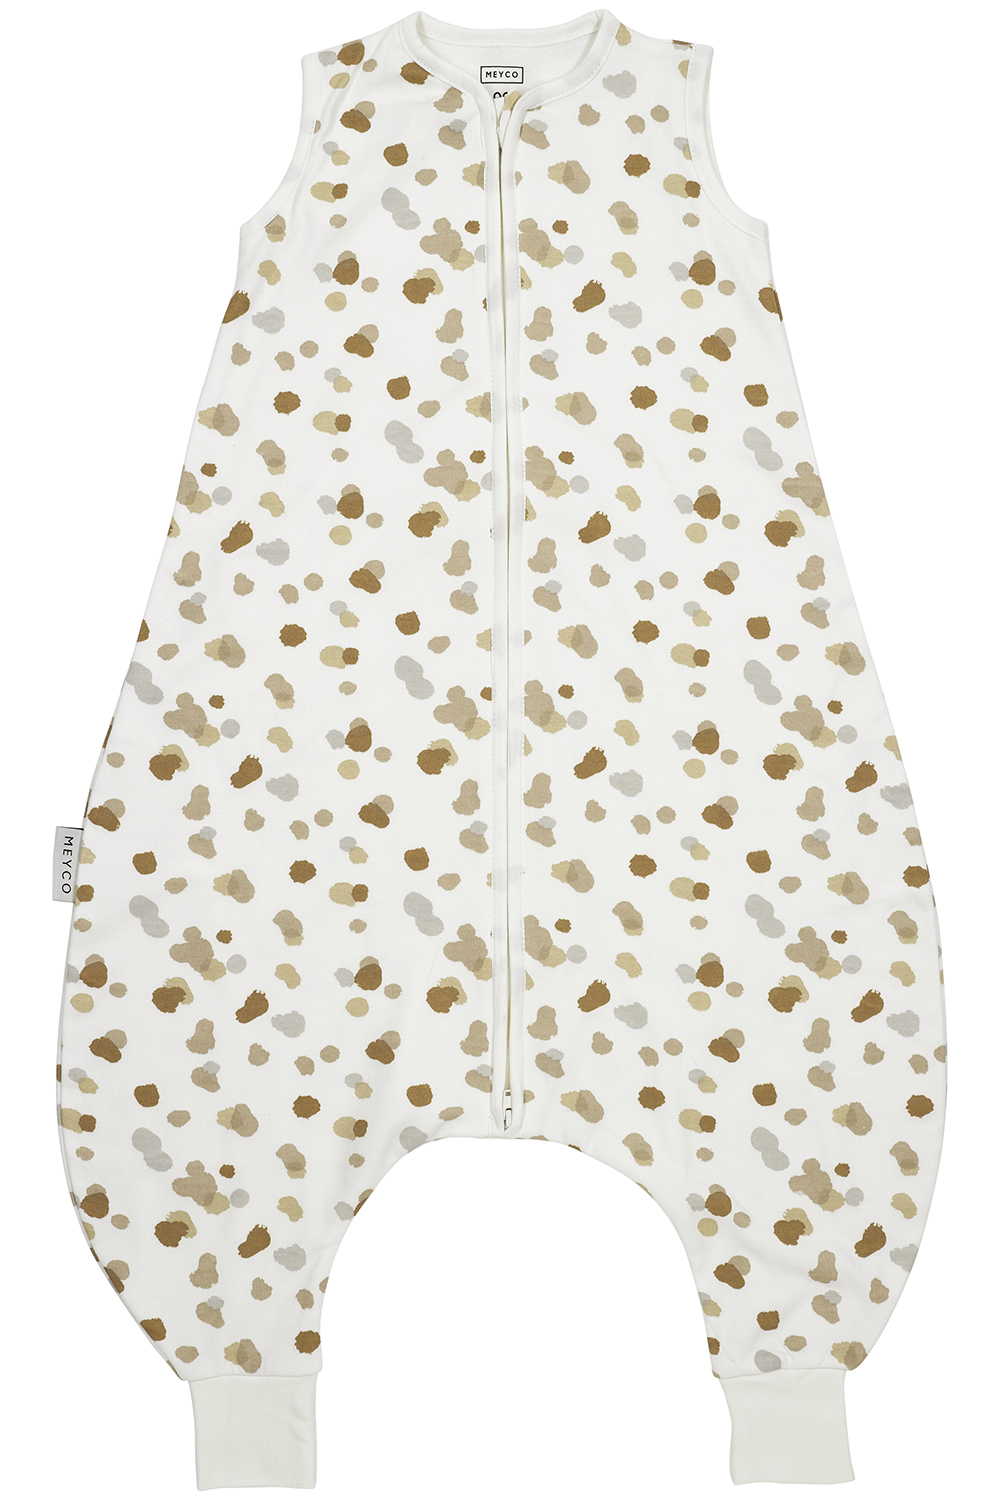 Baby zomer slaapoverall jumper Stains - sand - 104cm